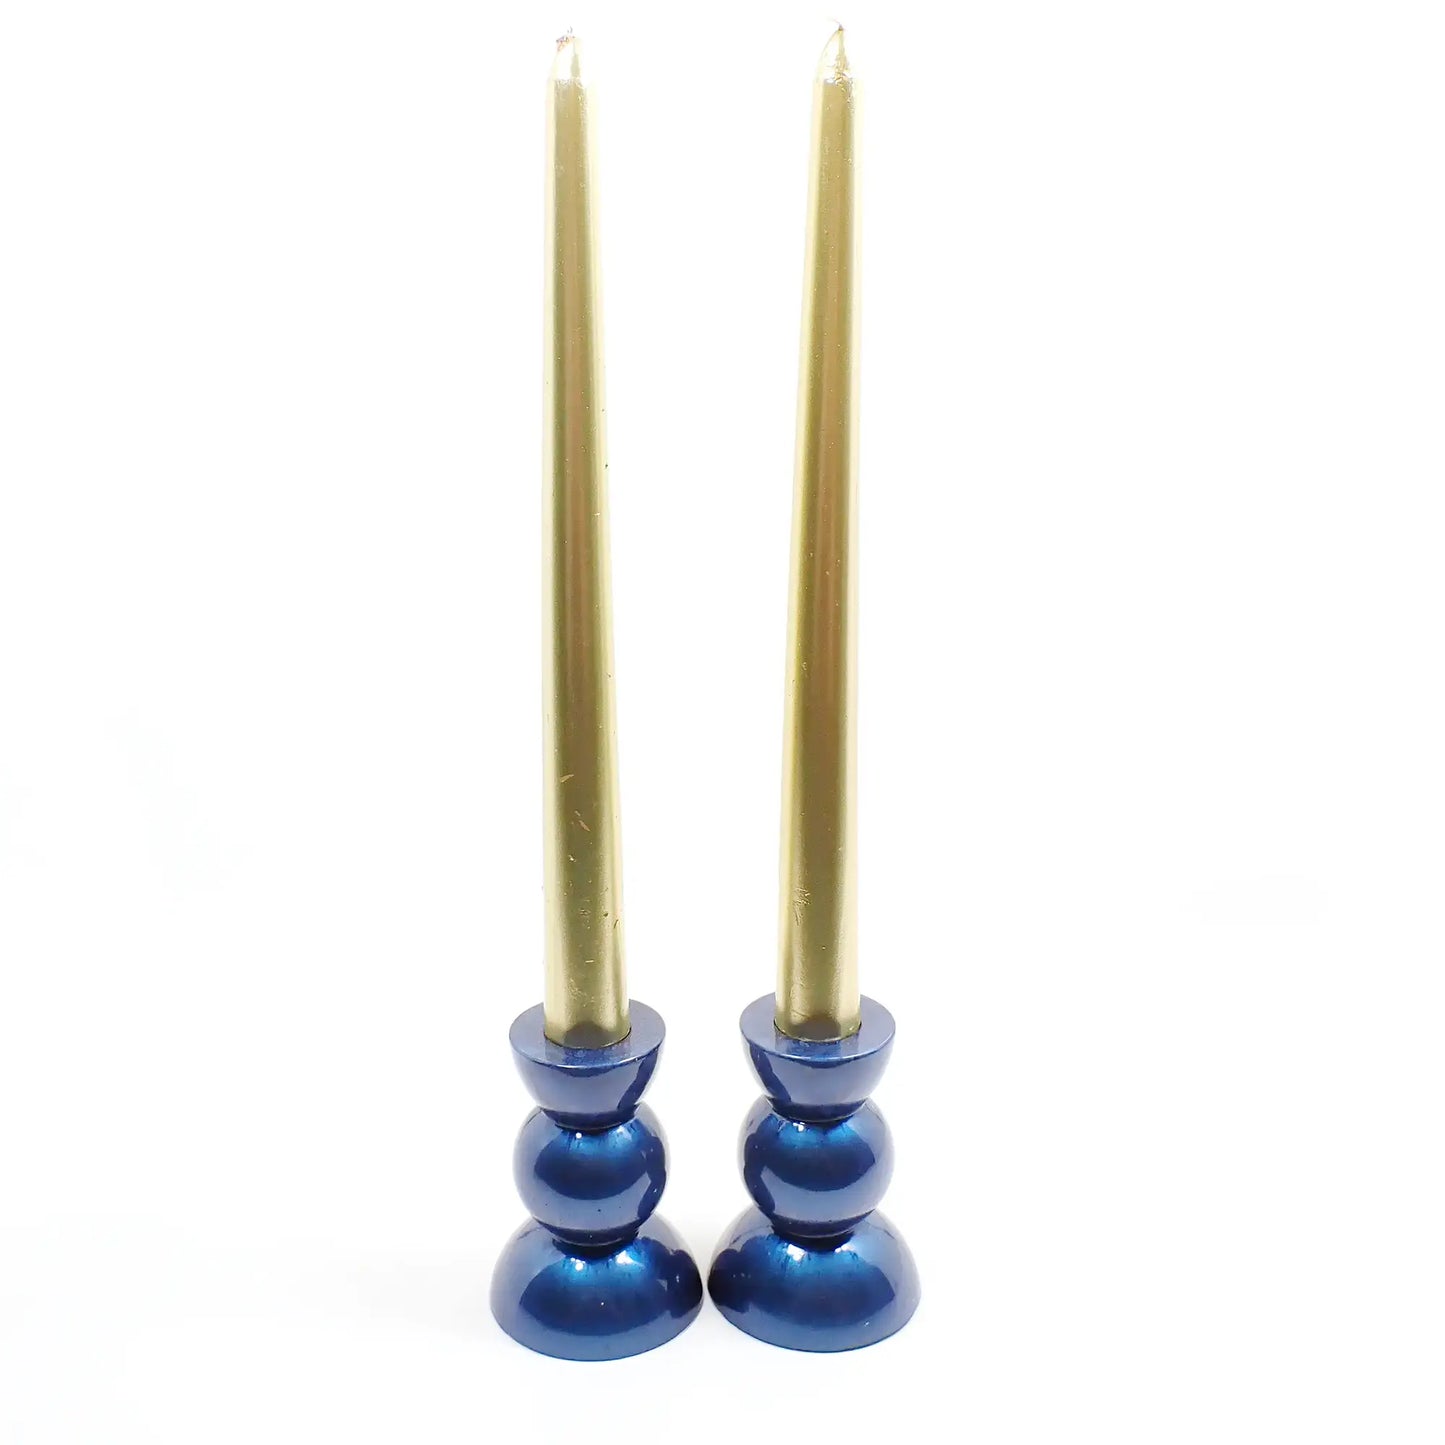 Set of Two Handmade Pearly Bright Denim Blue Resin Rounded Geometric Candlestick Holders